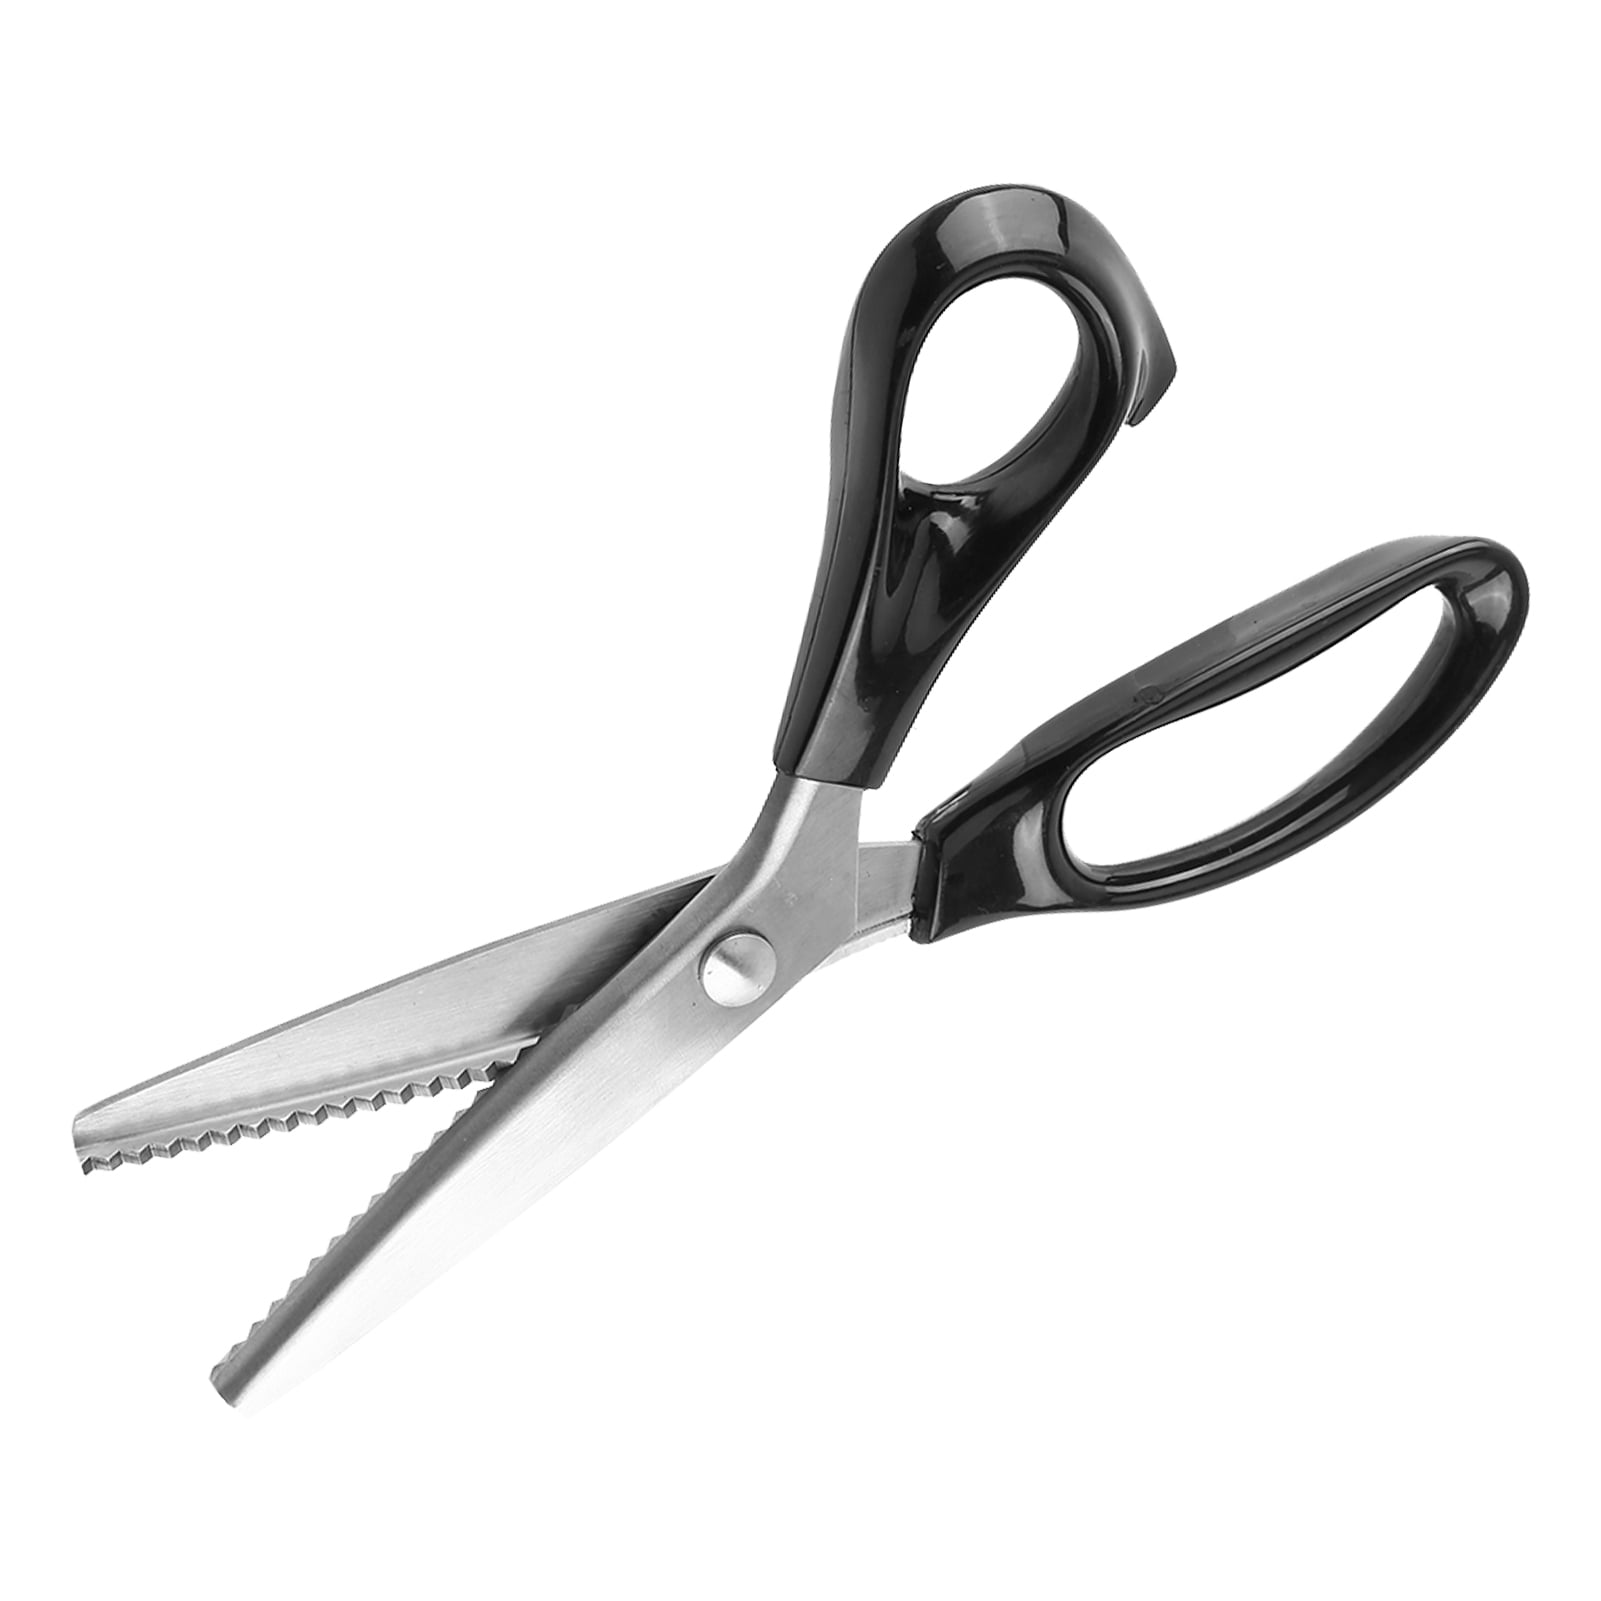 Zig Zag Scissors, Professional Pinking Shears, Different Size Serrated and  Scalloped Blades for Linings,Leather,Paper and Craft, Stainless Steel